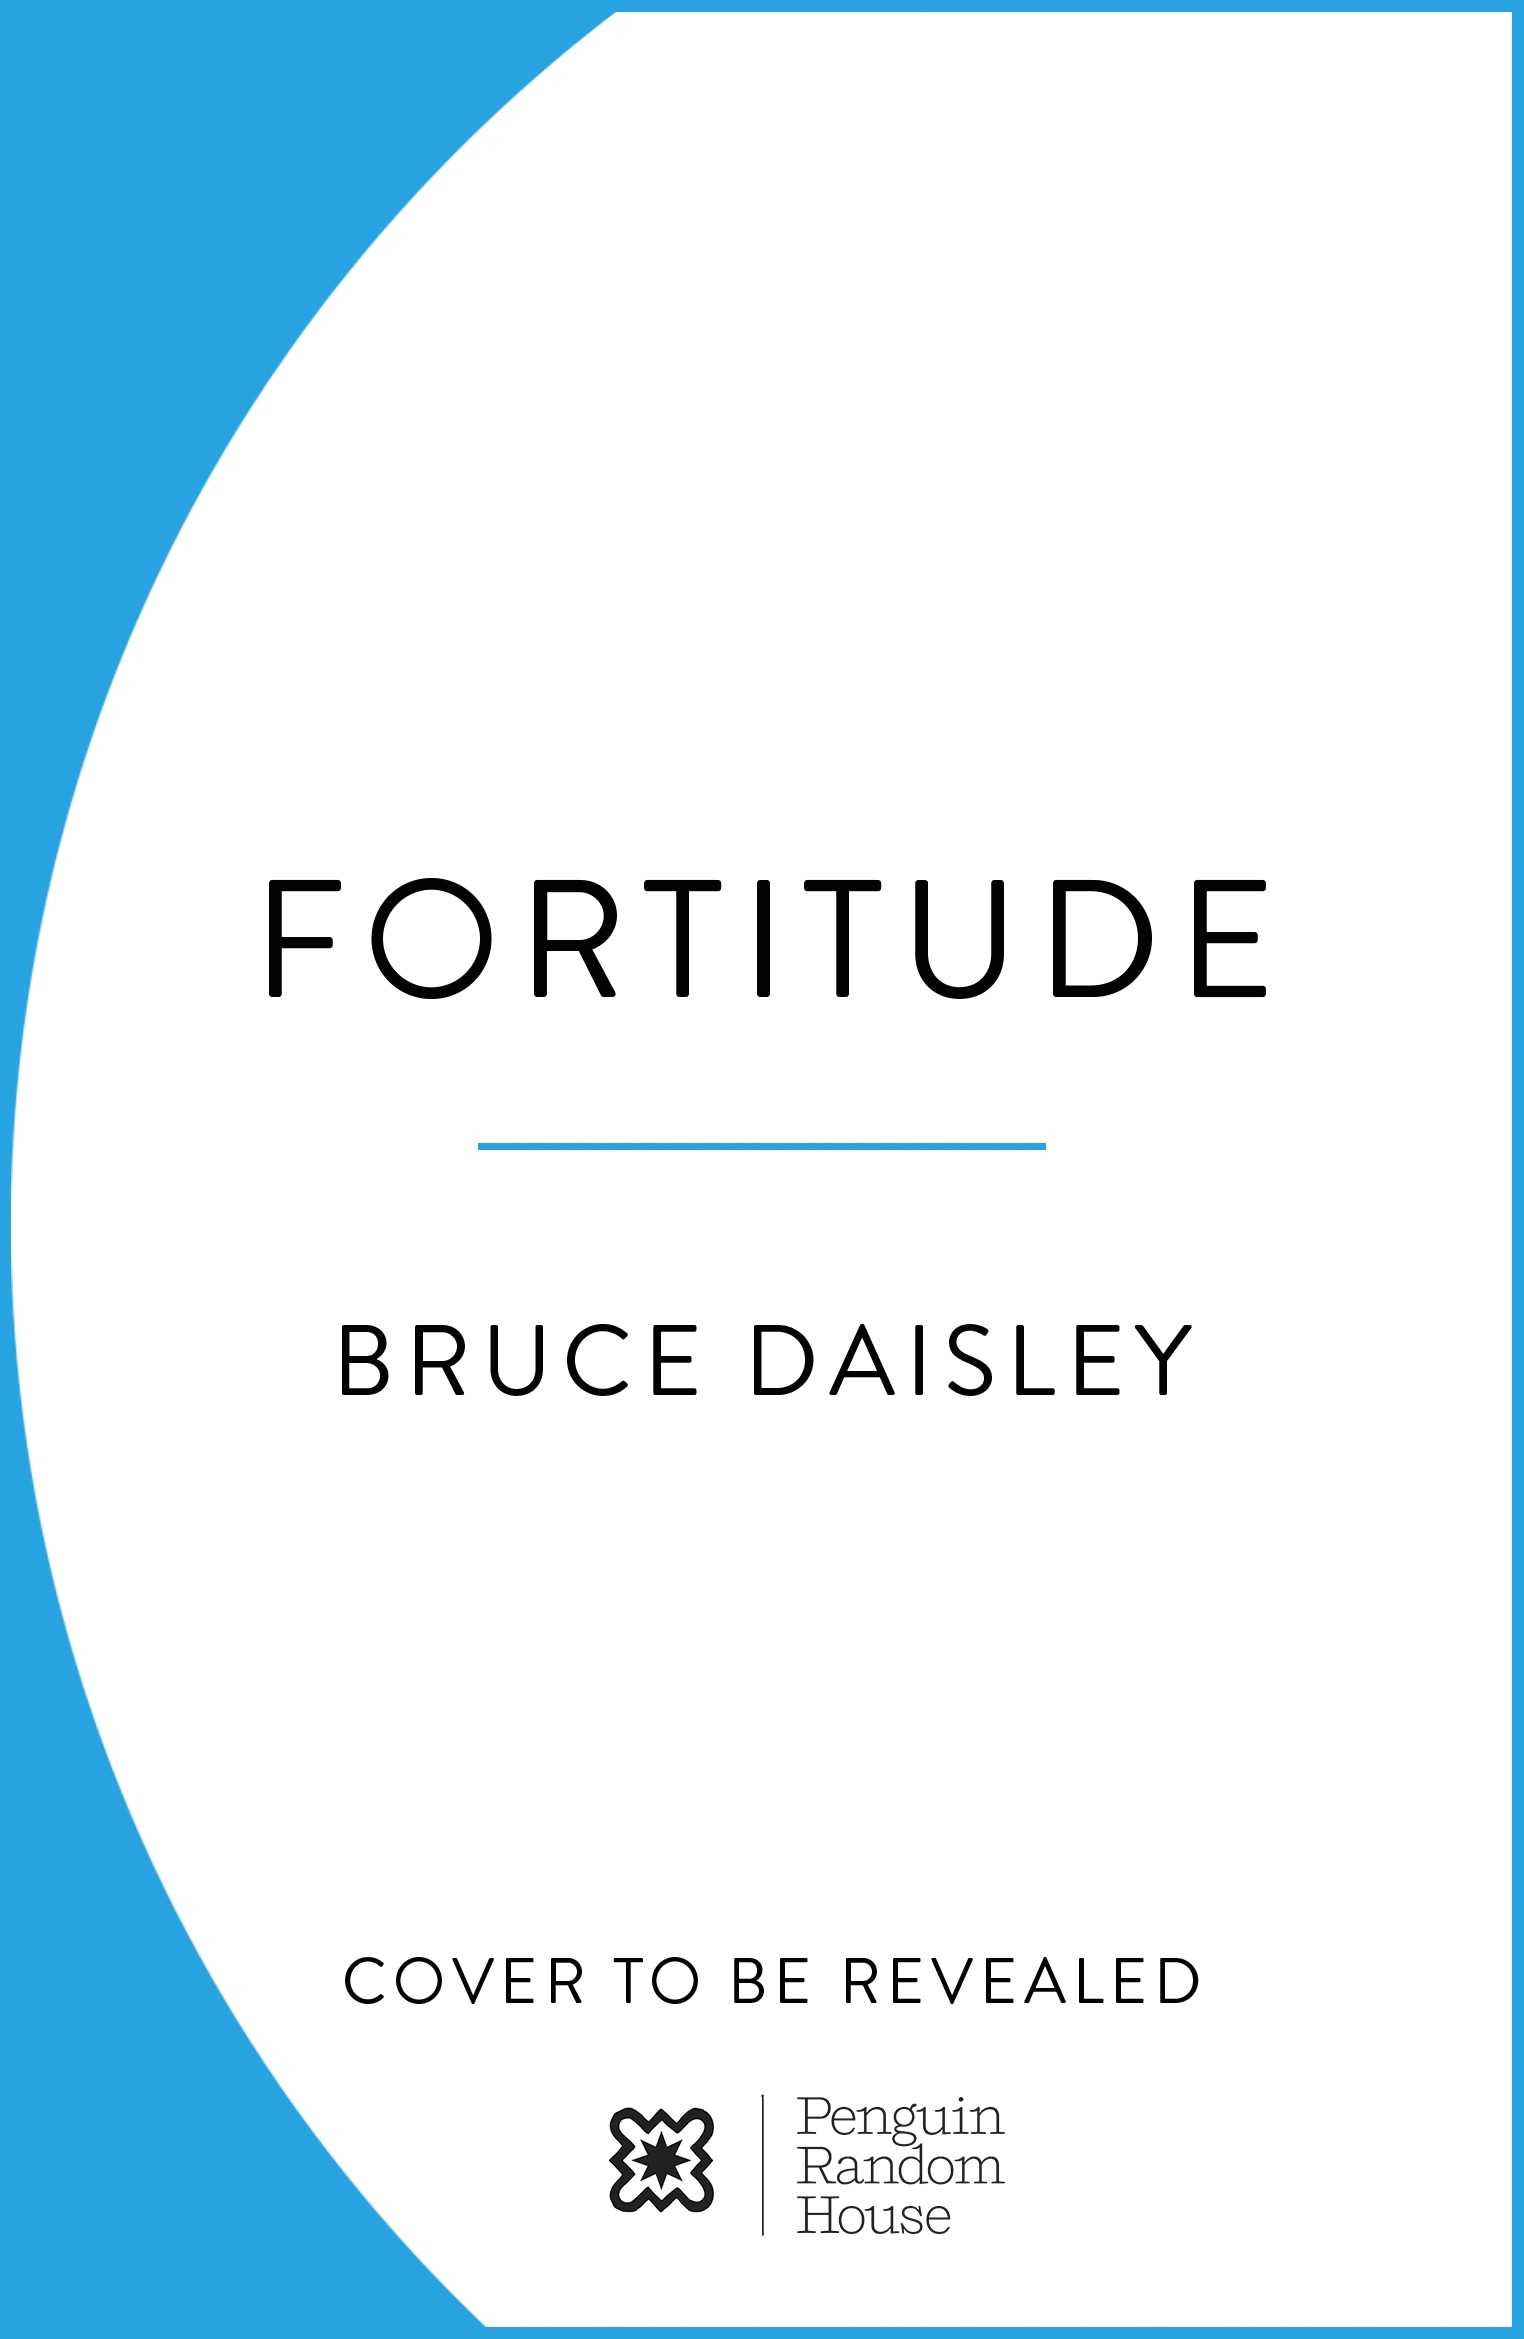 Book “Fortitude” by Bruce Daisley — June 16, 2022